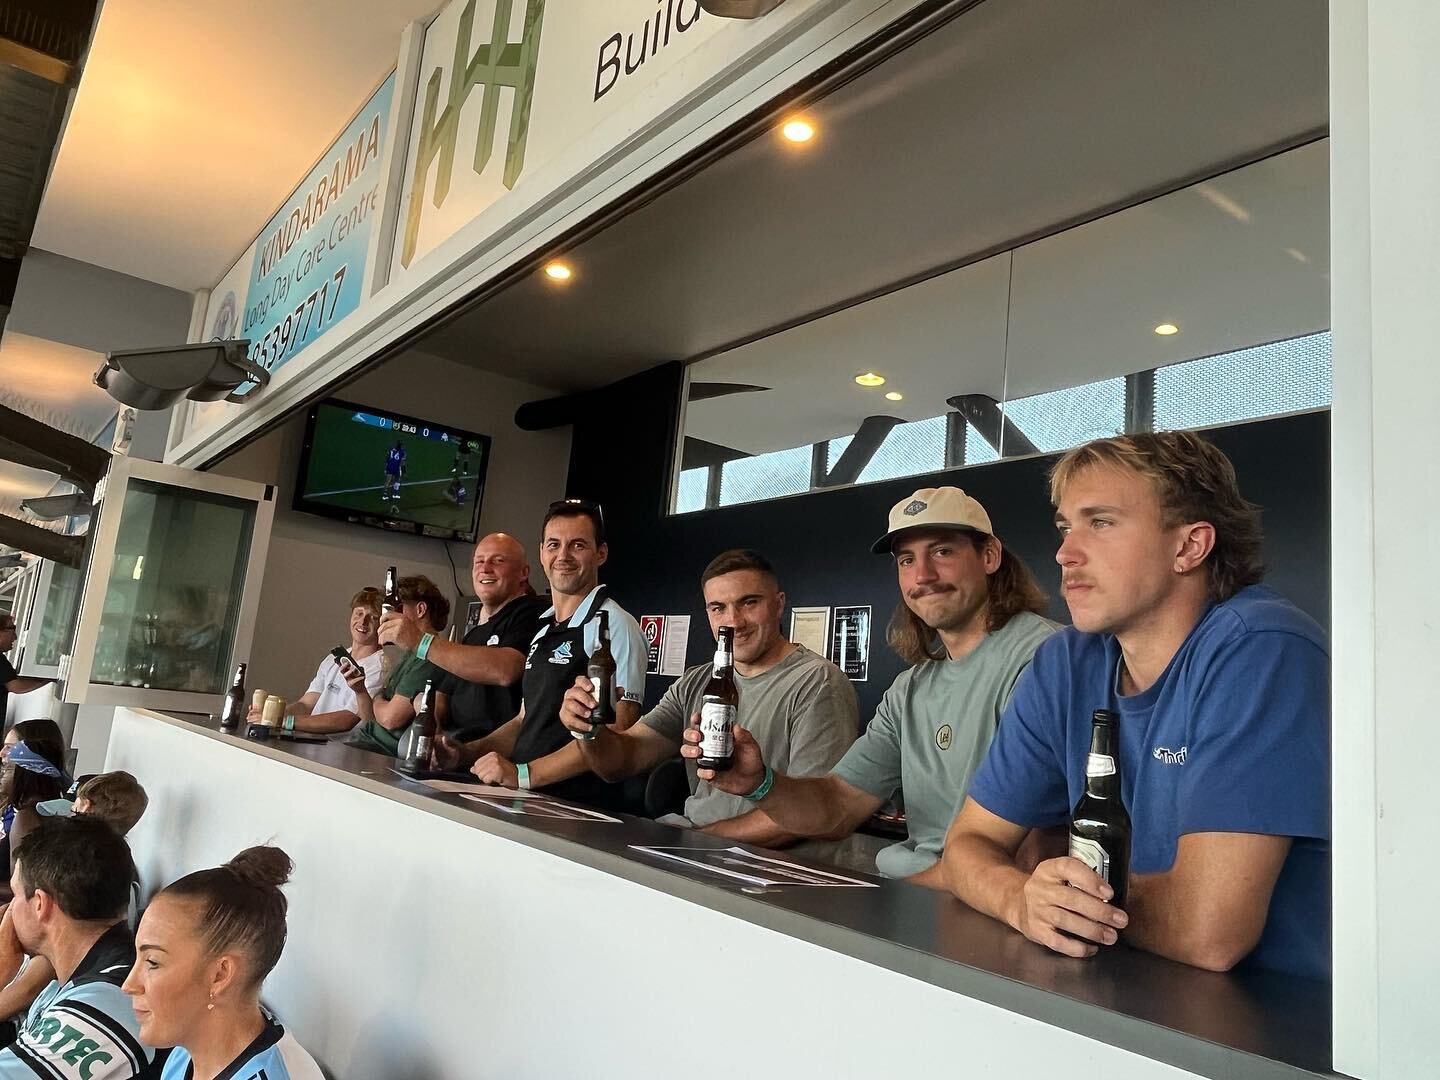 Fun night out for the pinnacle team. Watching the mighty sharkies get the win. #pinnaclebuildingdevelopments #dreamteam #sutherlandshirebuilder #sutherlandshirebusiness #upupcronulla